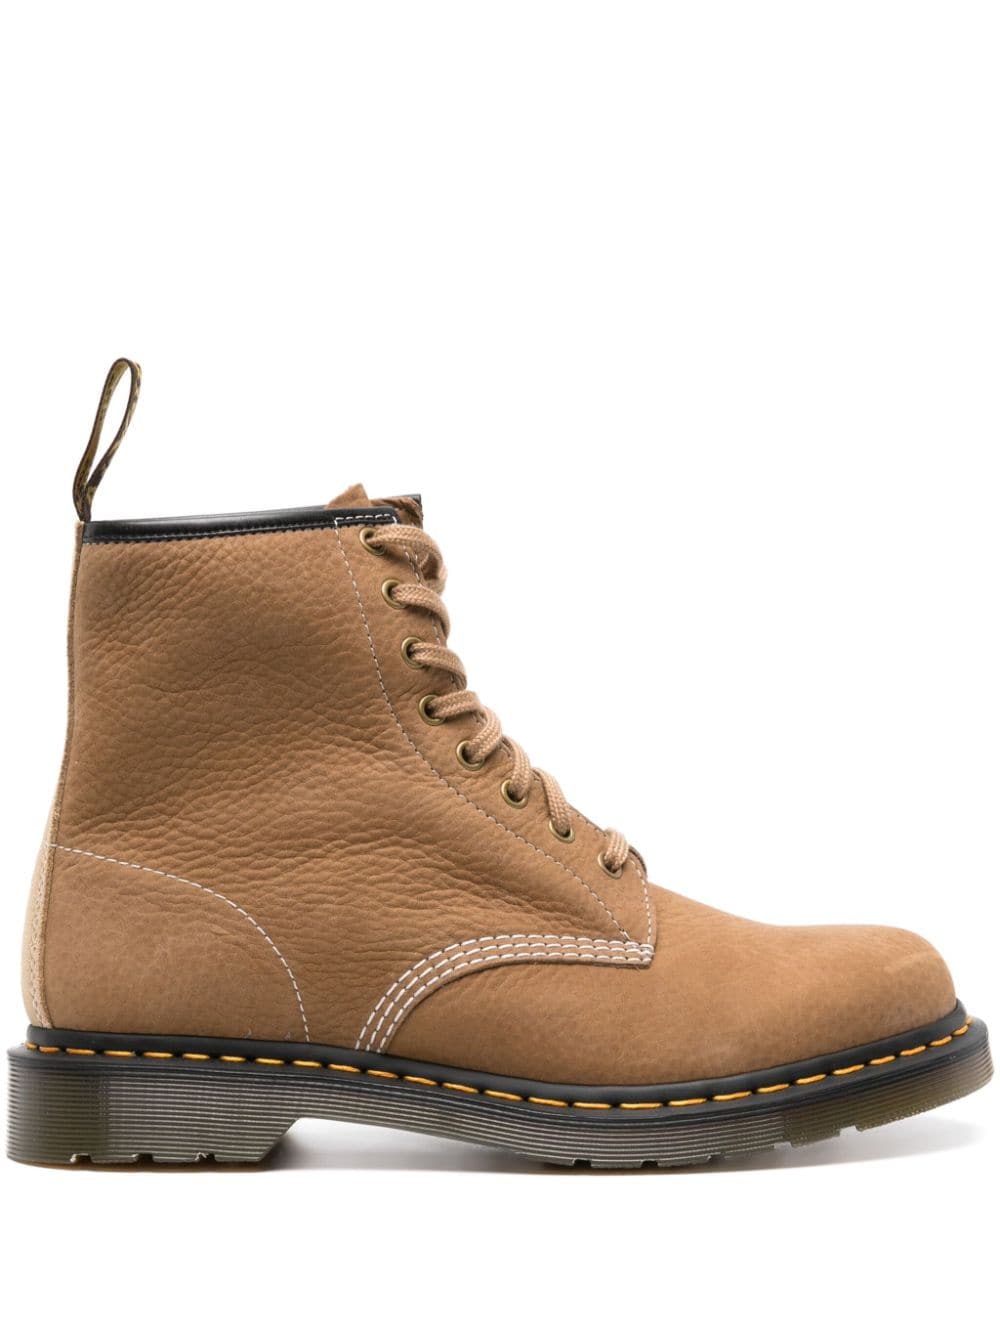 Dr. Martens 1460 Nubuck Boots In 中性色